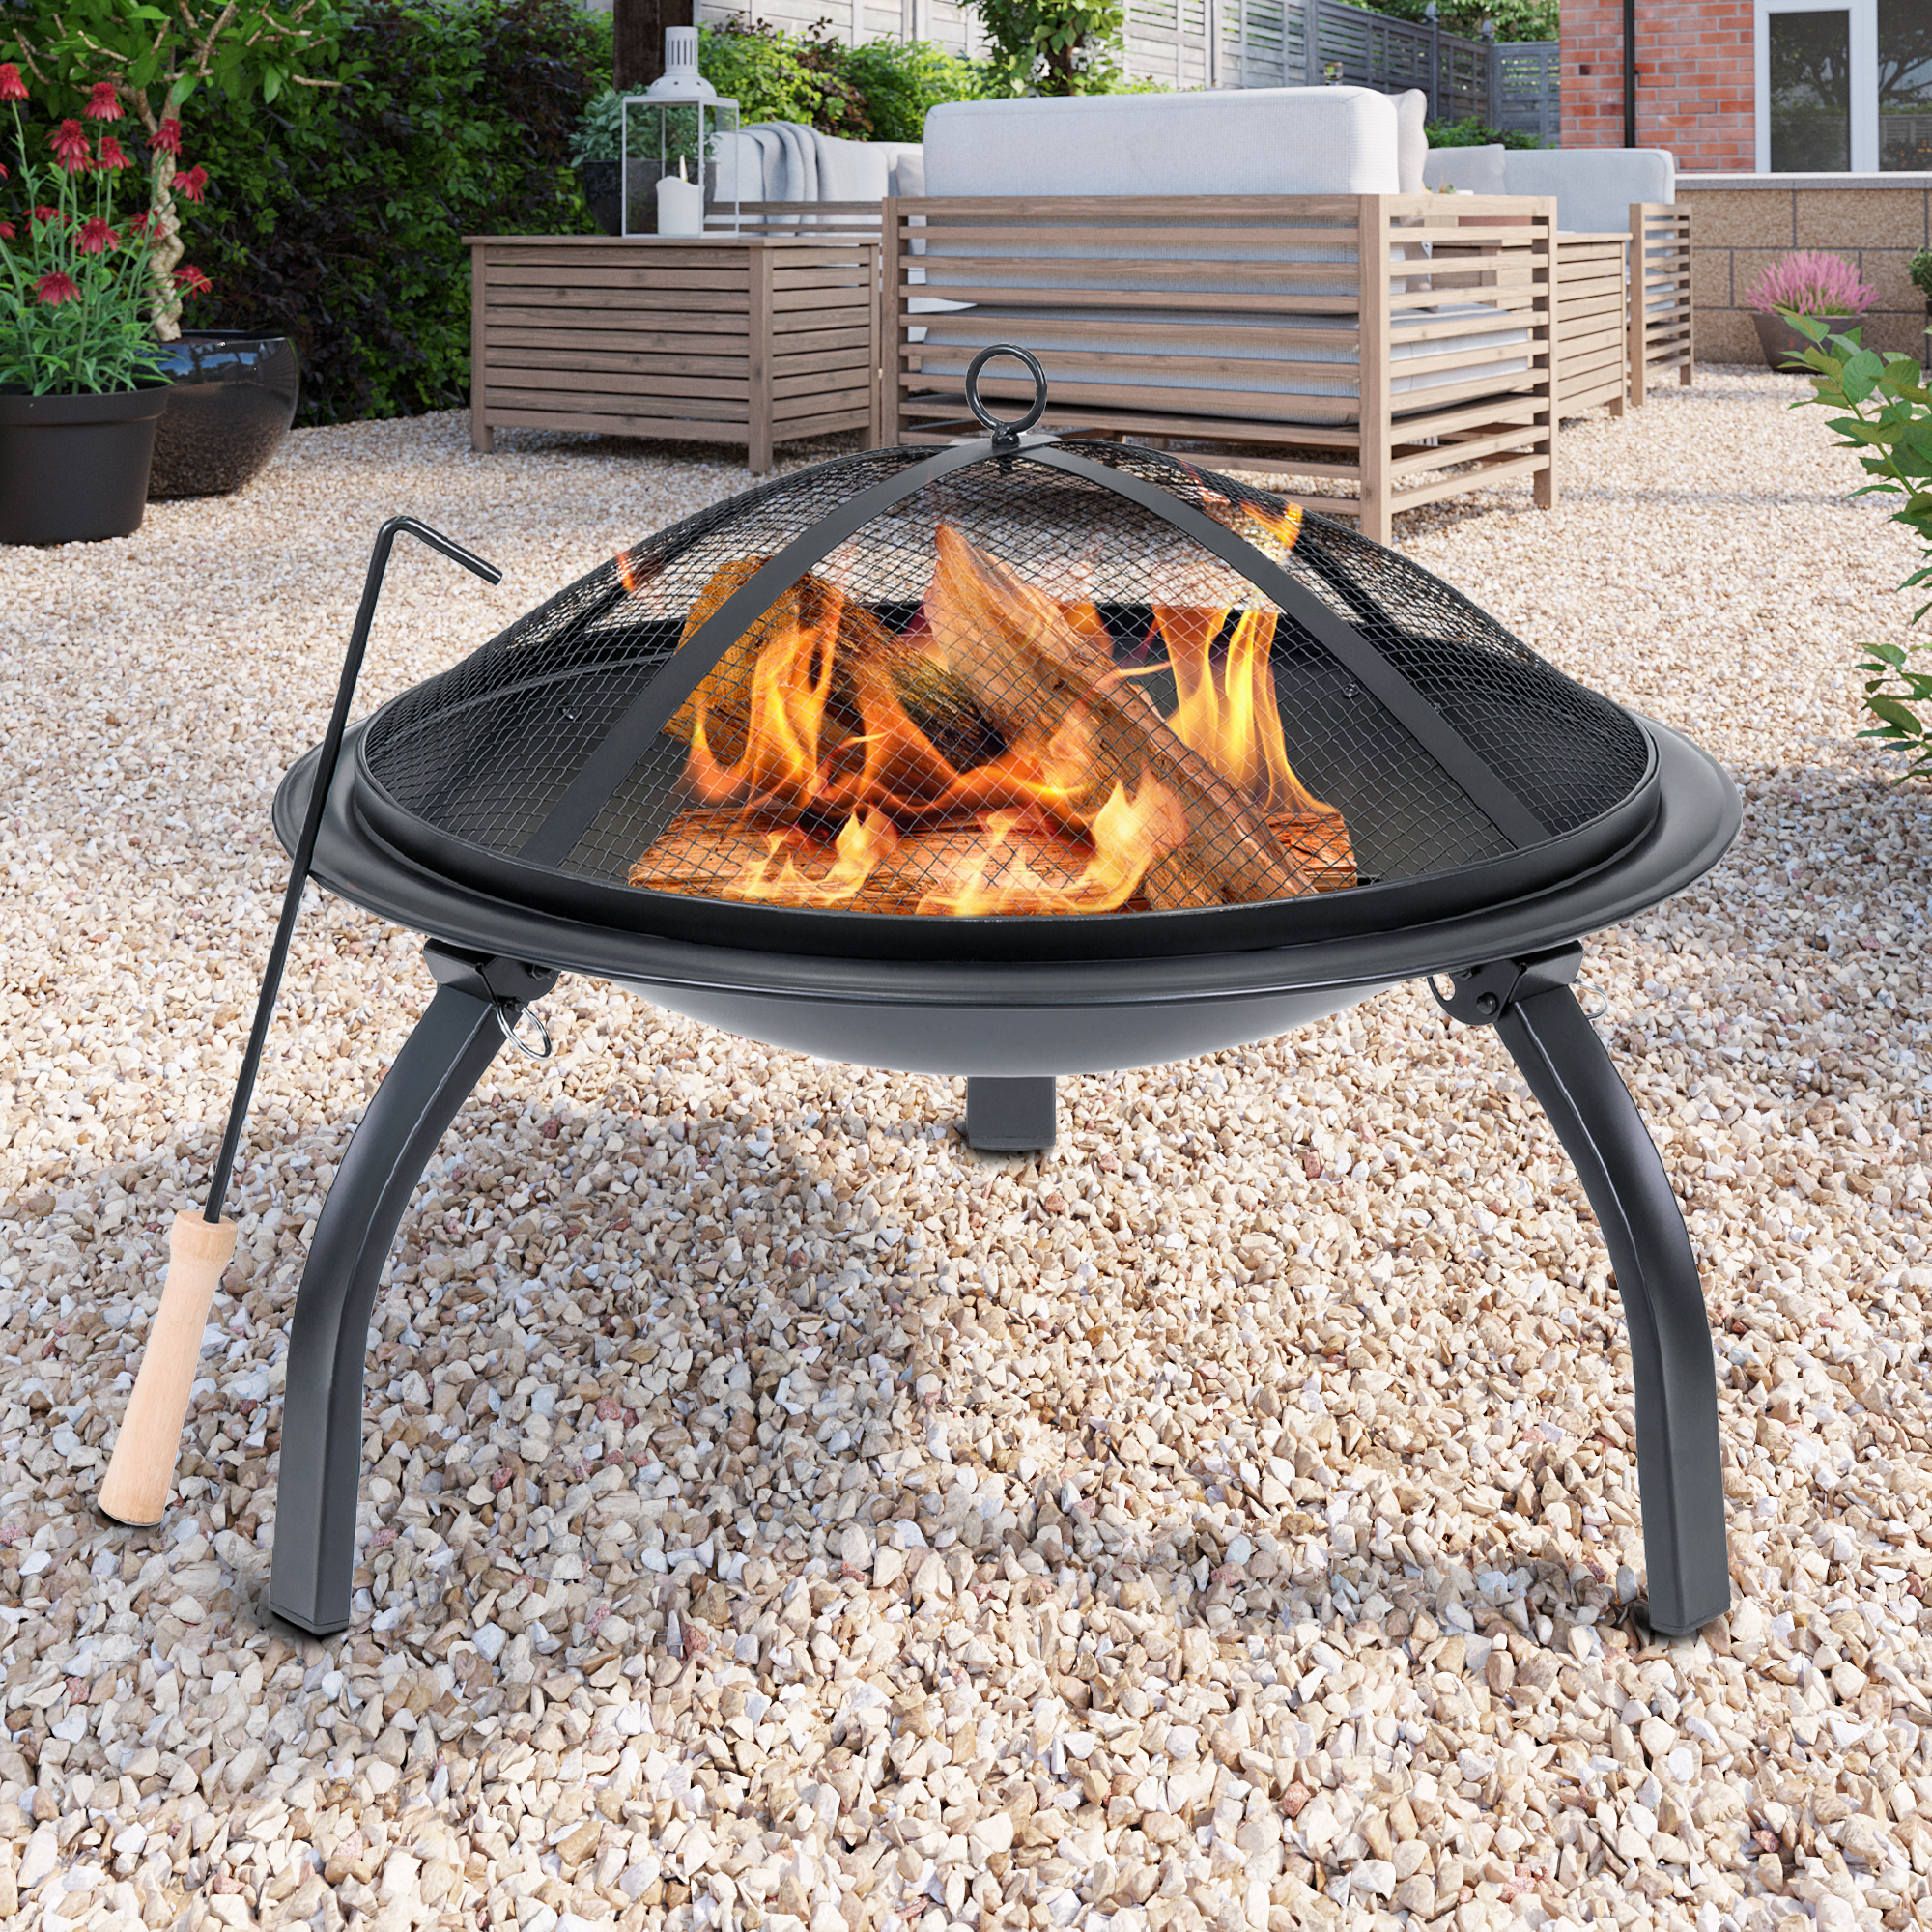 BillyOh Oakland Small Round Foldable Steel Fire Pit - Small Foldable Fire Pit